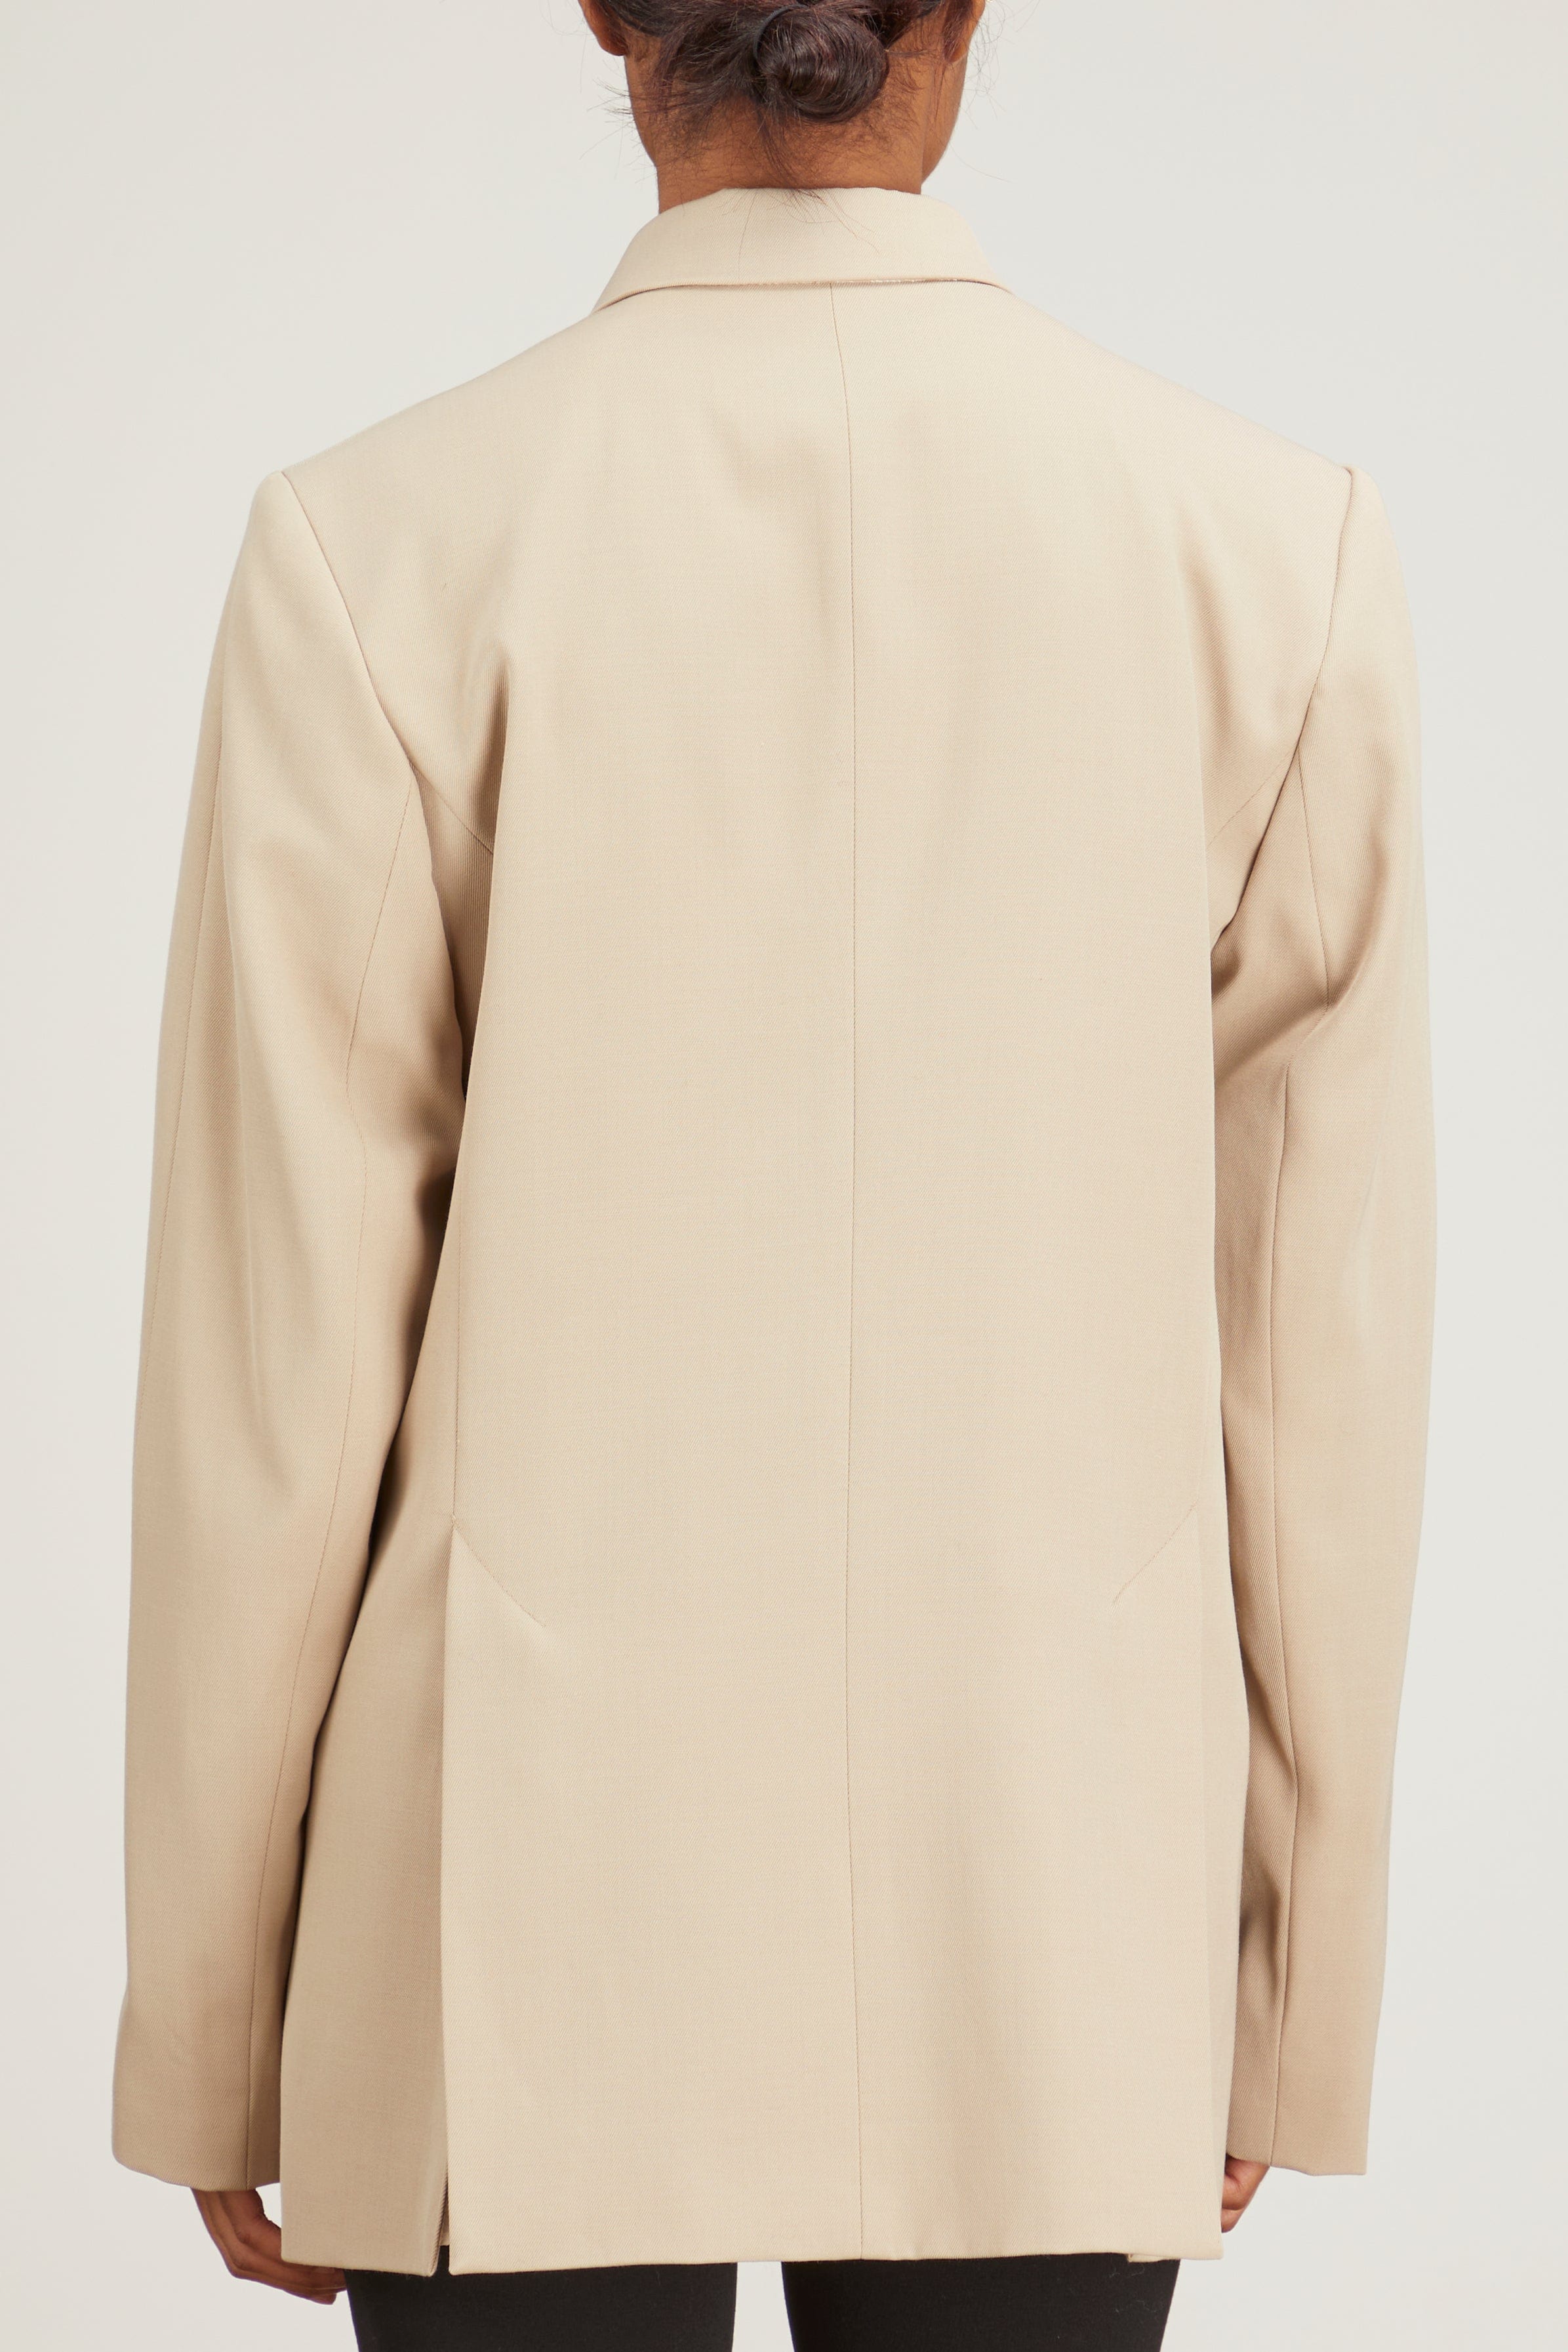 Toteme Jackets Double Breasted Vent Blazer in Beige